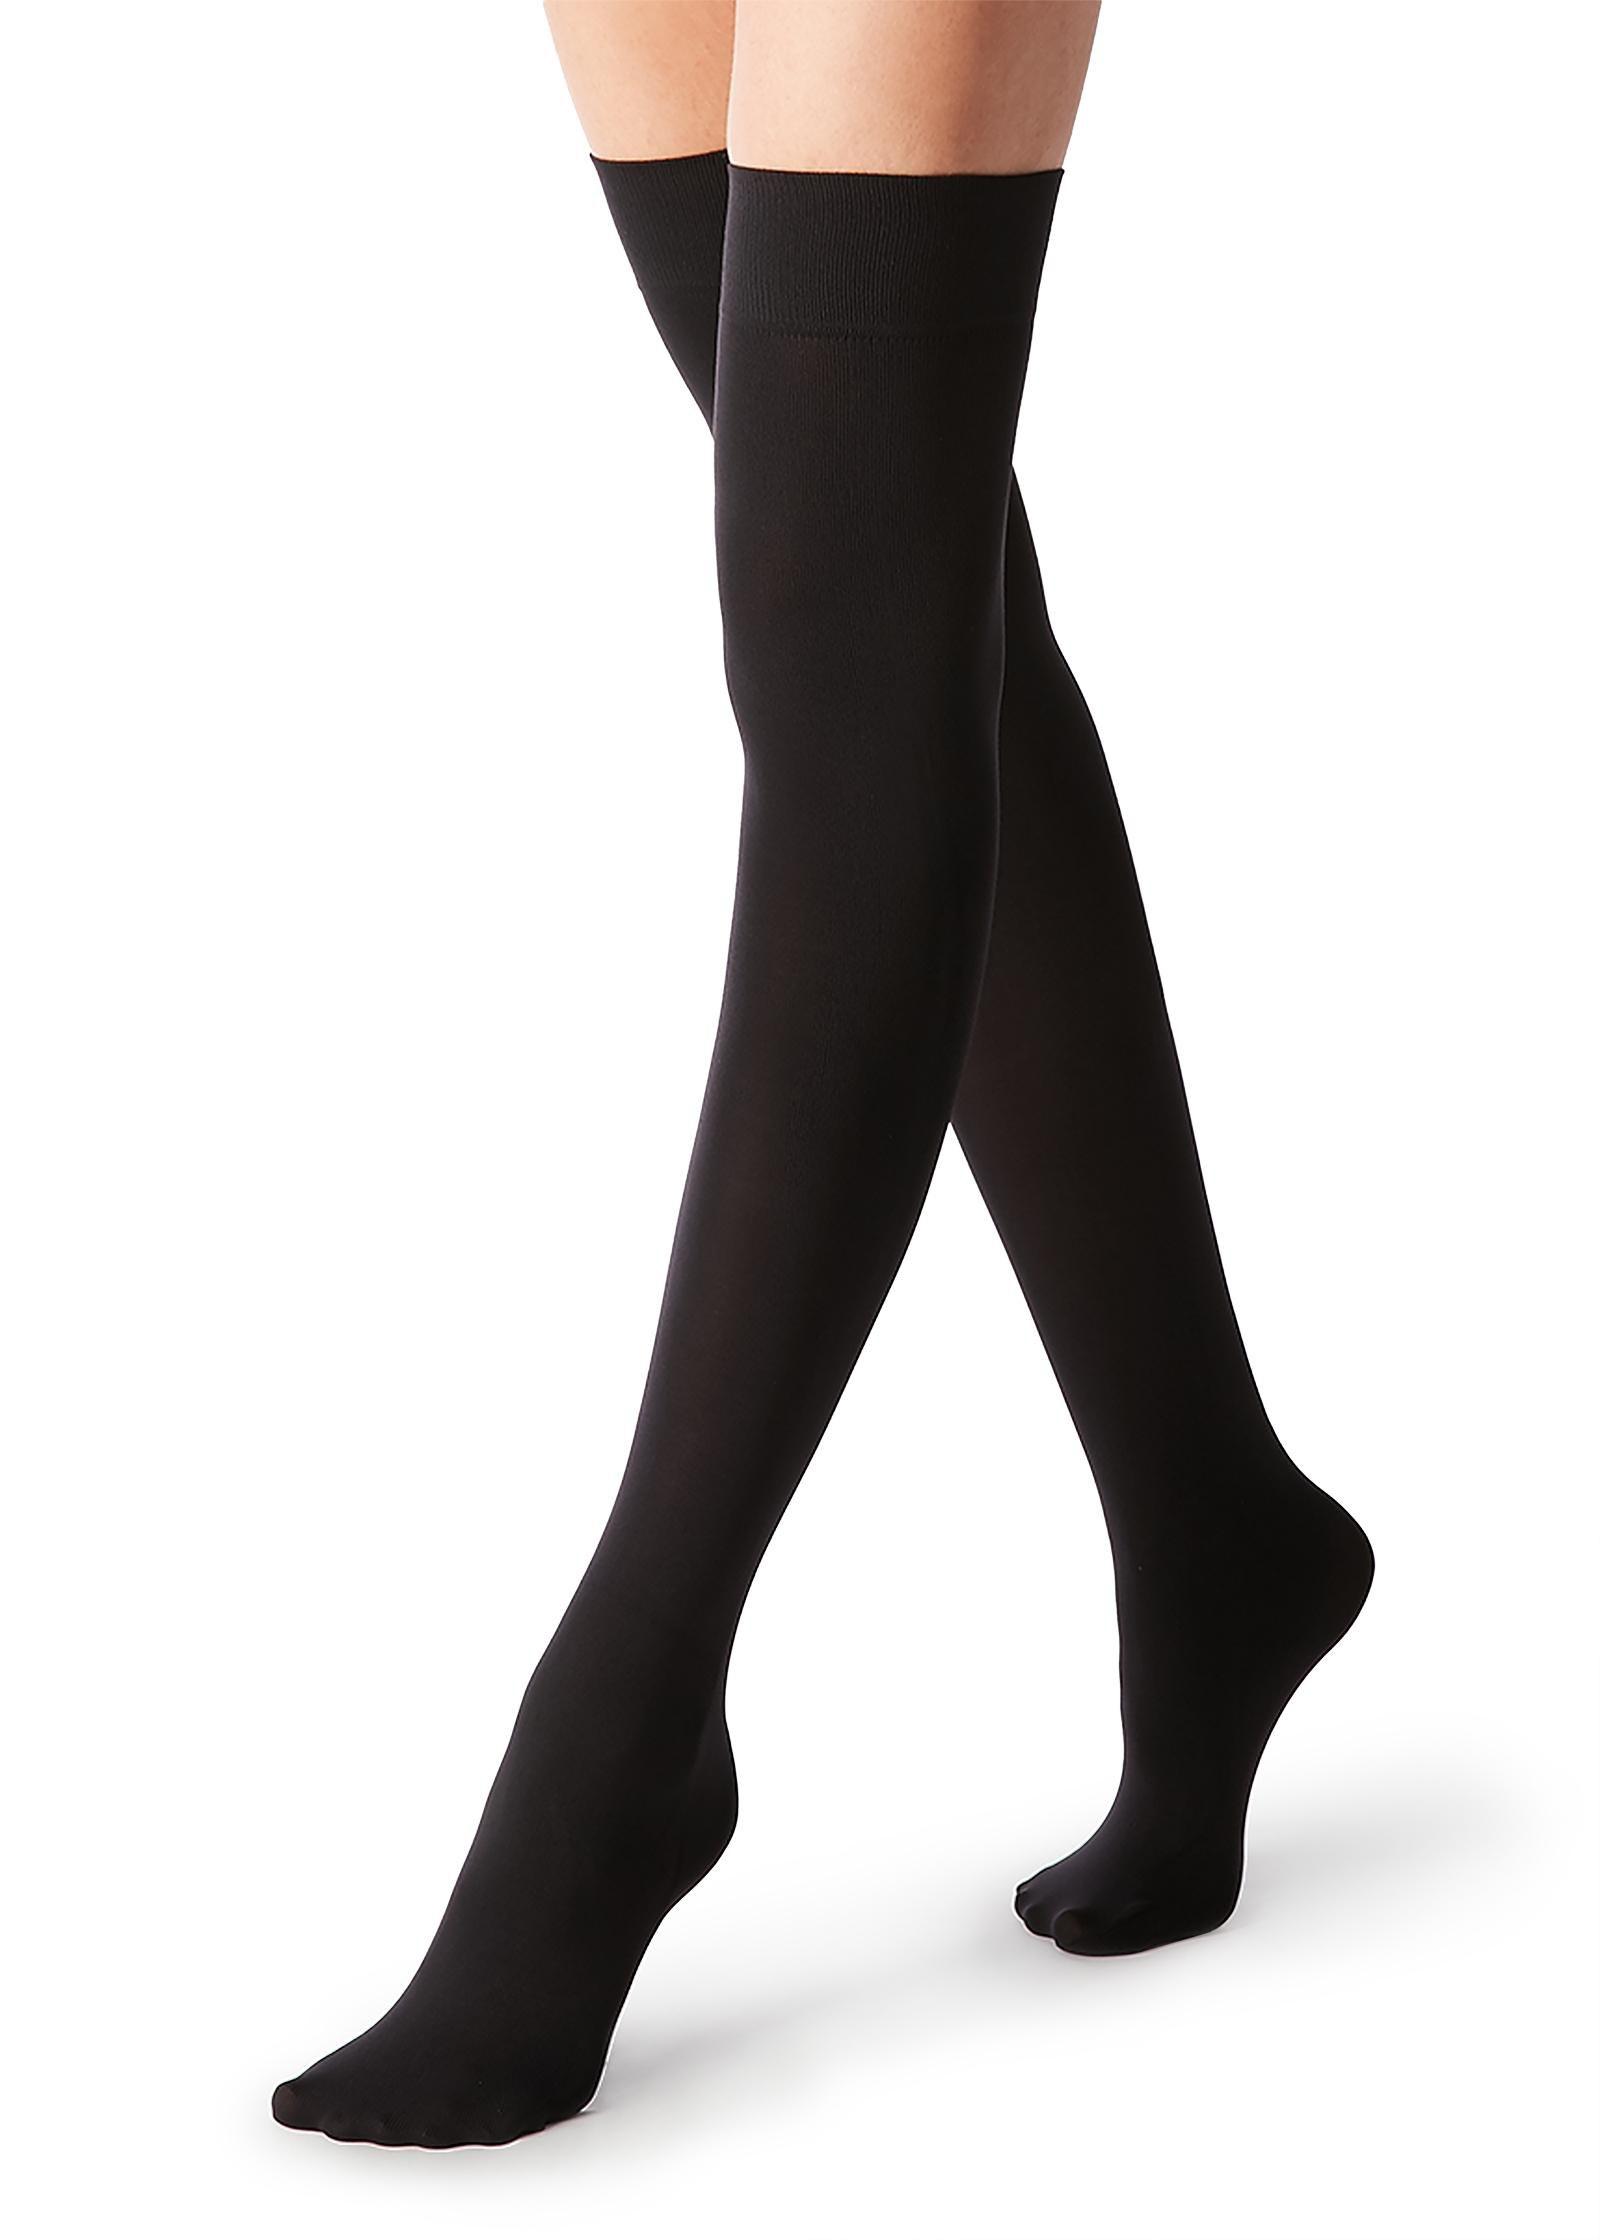 Calzedonia Microfiber Over The Knee Stockings in Black - Lyst